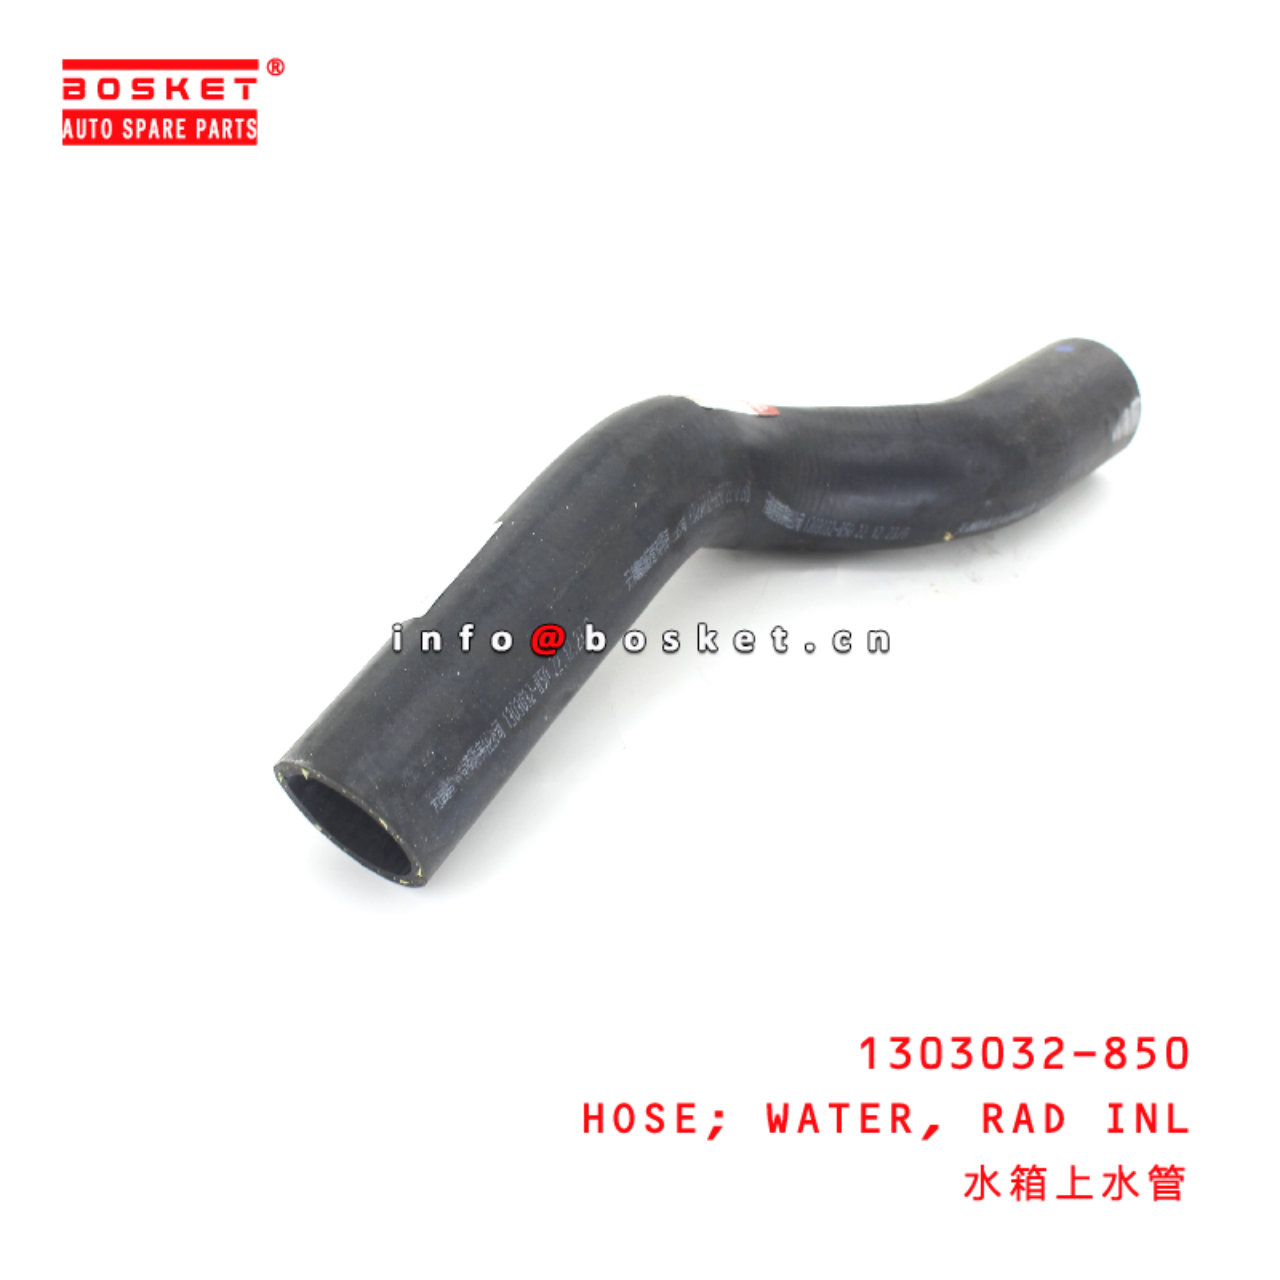 1303032-850 Radiator Inlet Water Hose suitable for...